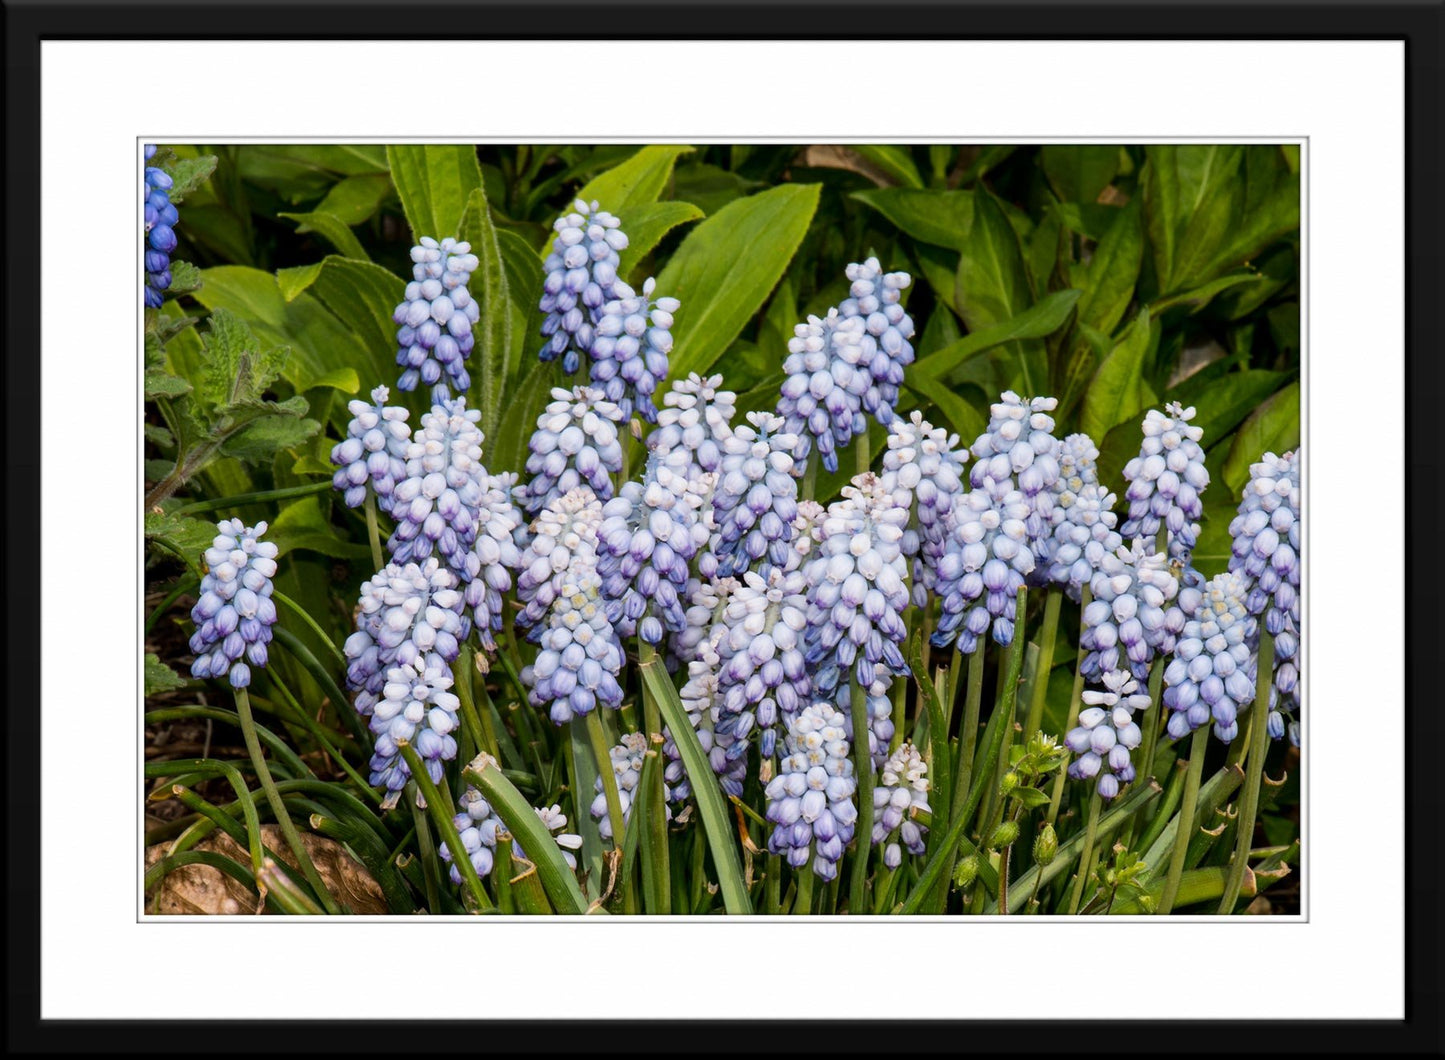 Whispers of Spring: A captivating Grape Hyacinth photo